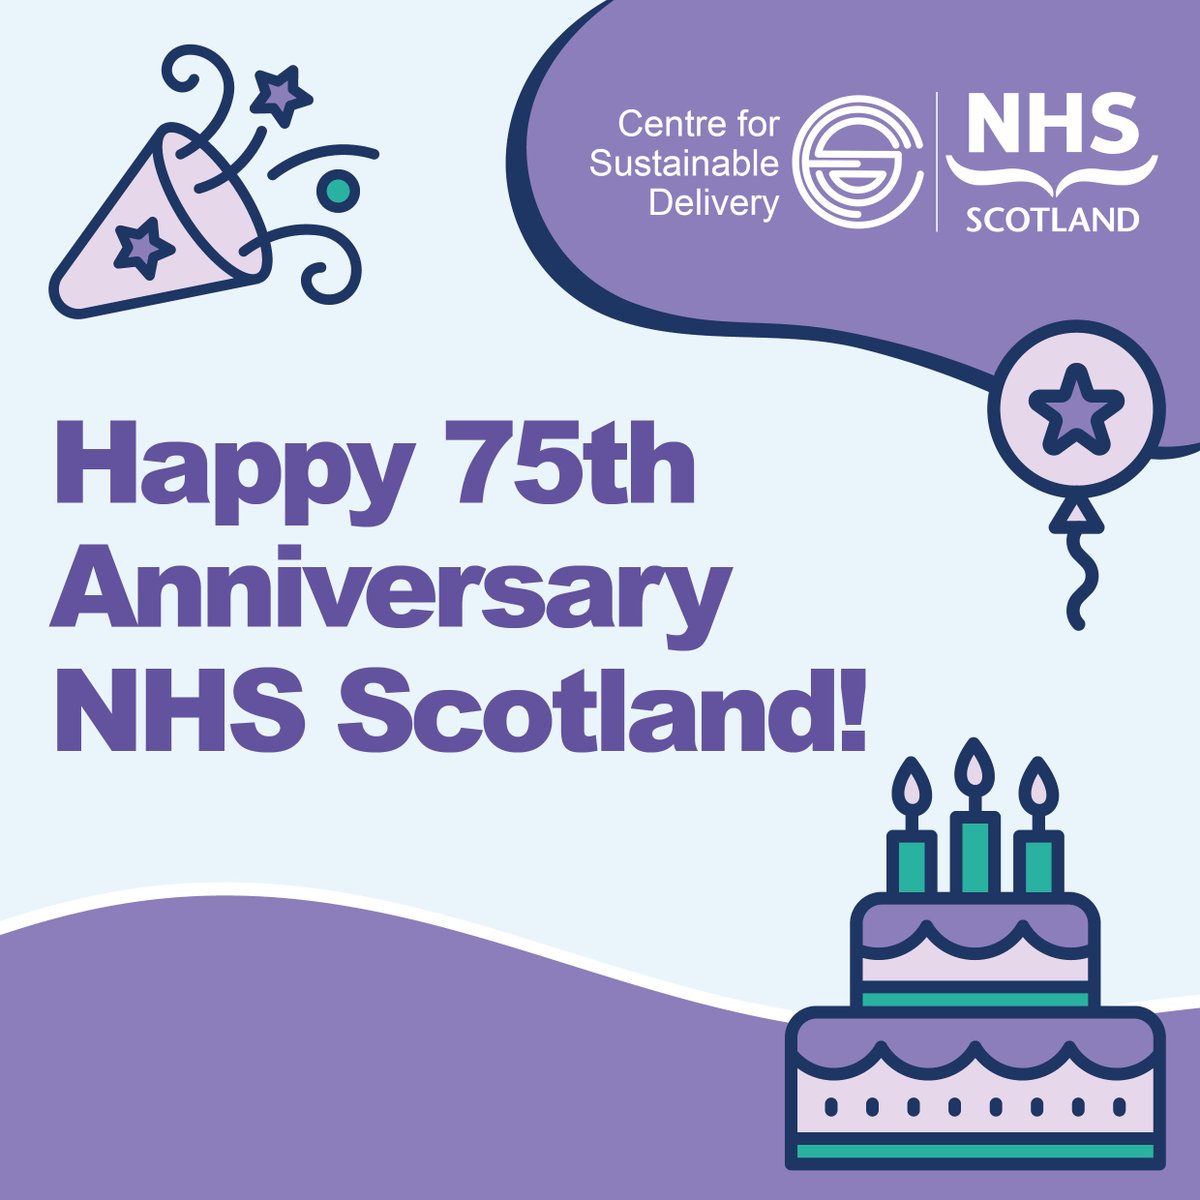 Happy 75th birthday to our NHS from everyone at the national Centre for Sustainable Delivery.
Proud to support #NHS 💙 
#nhsscot75 #ServingScotland